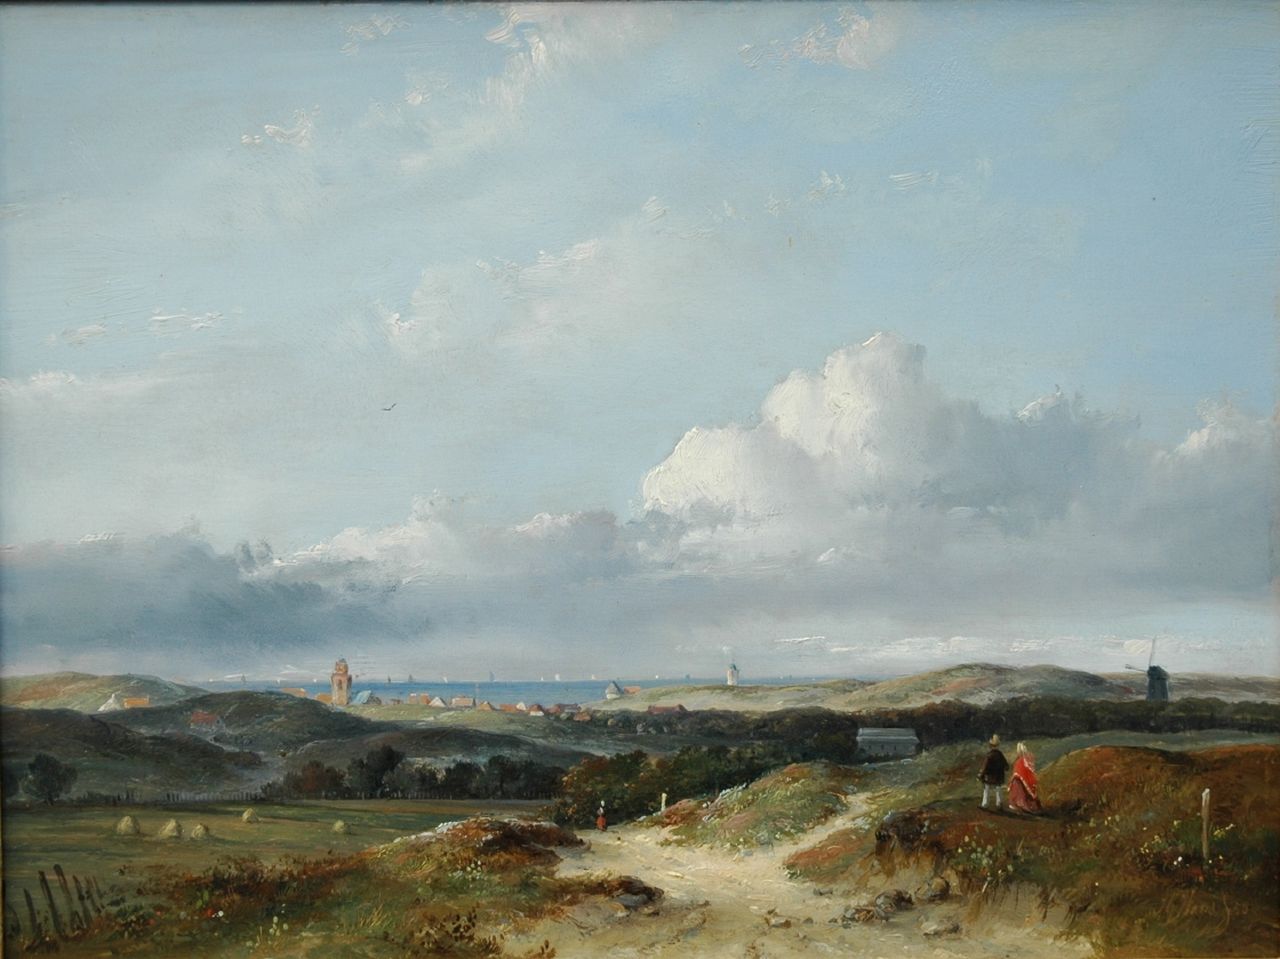 Hans J.G.  | Josephus Gerardus Hans, A panoramic dune landscape with 'Katwijk aan Zee' in the distance, oil on panel 25.1 x 33.5 cm, signed l.r. and dated '50